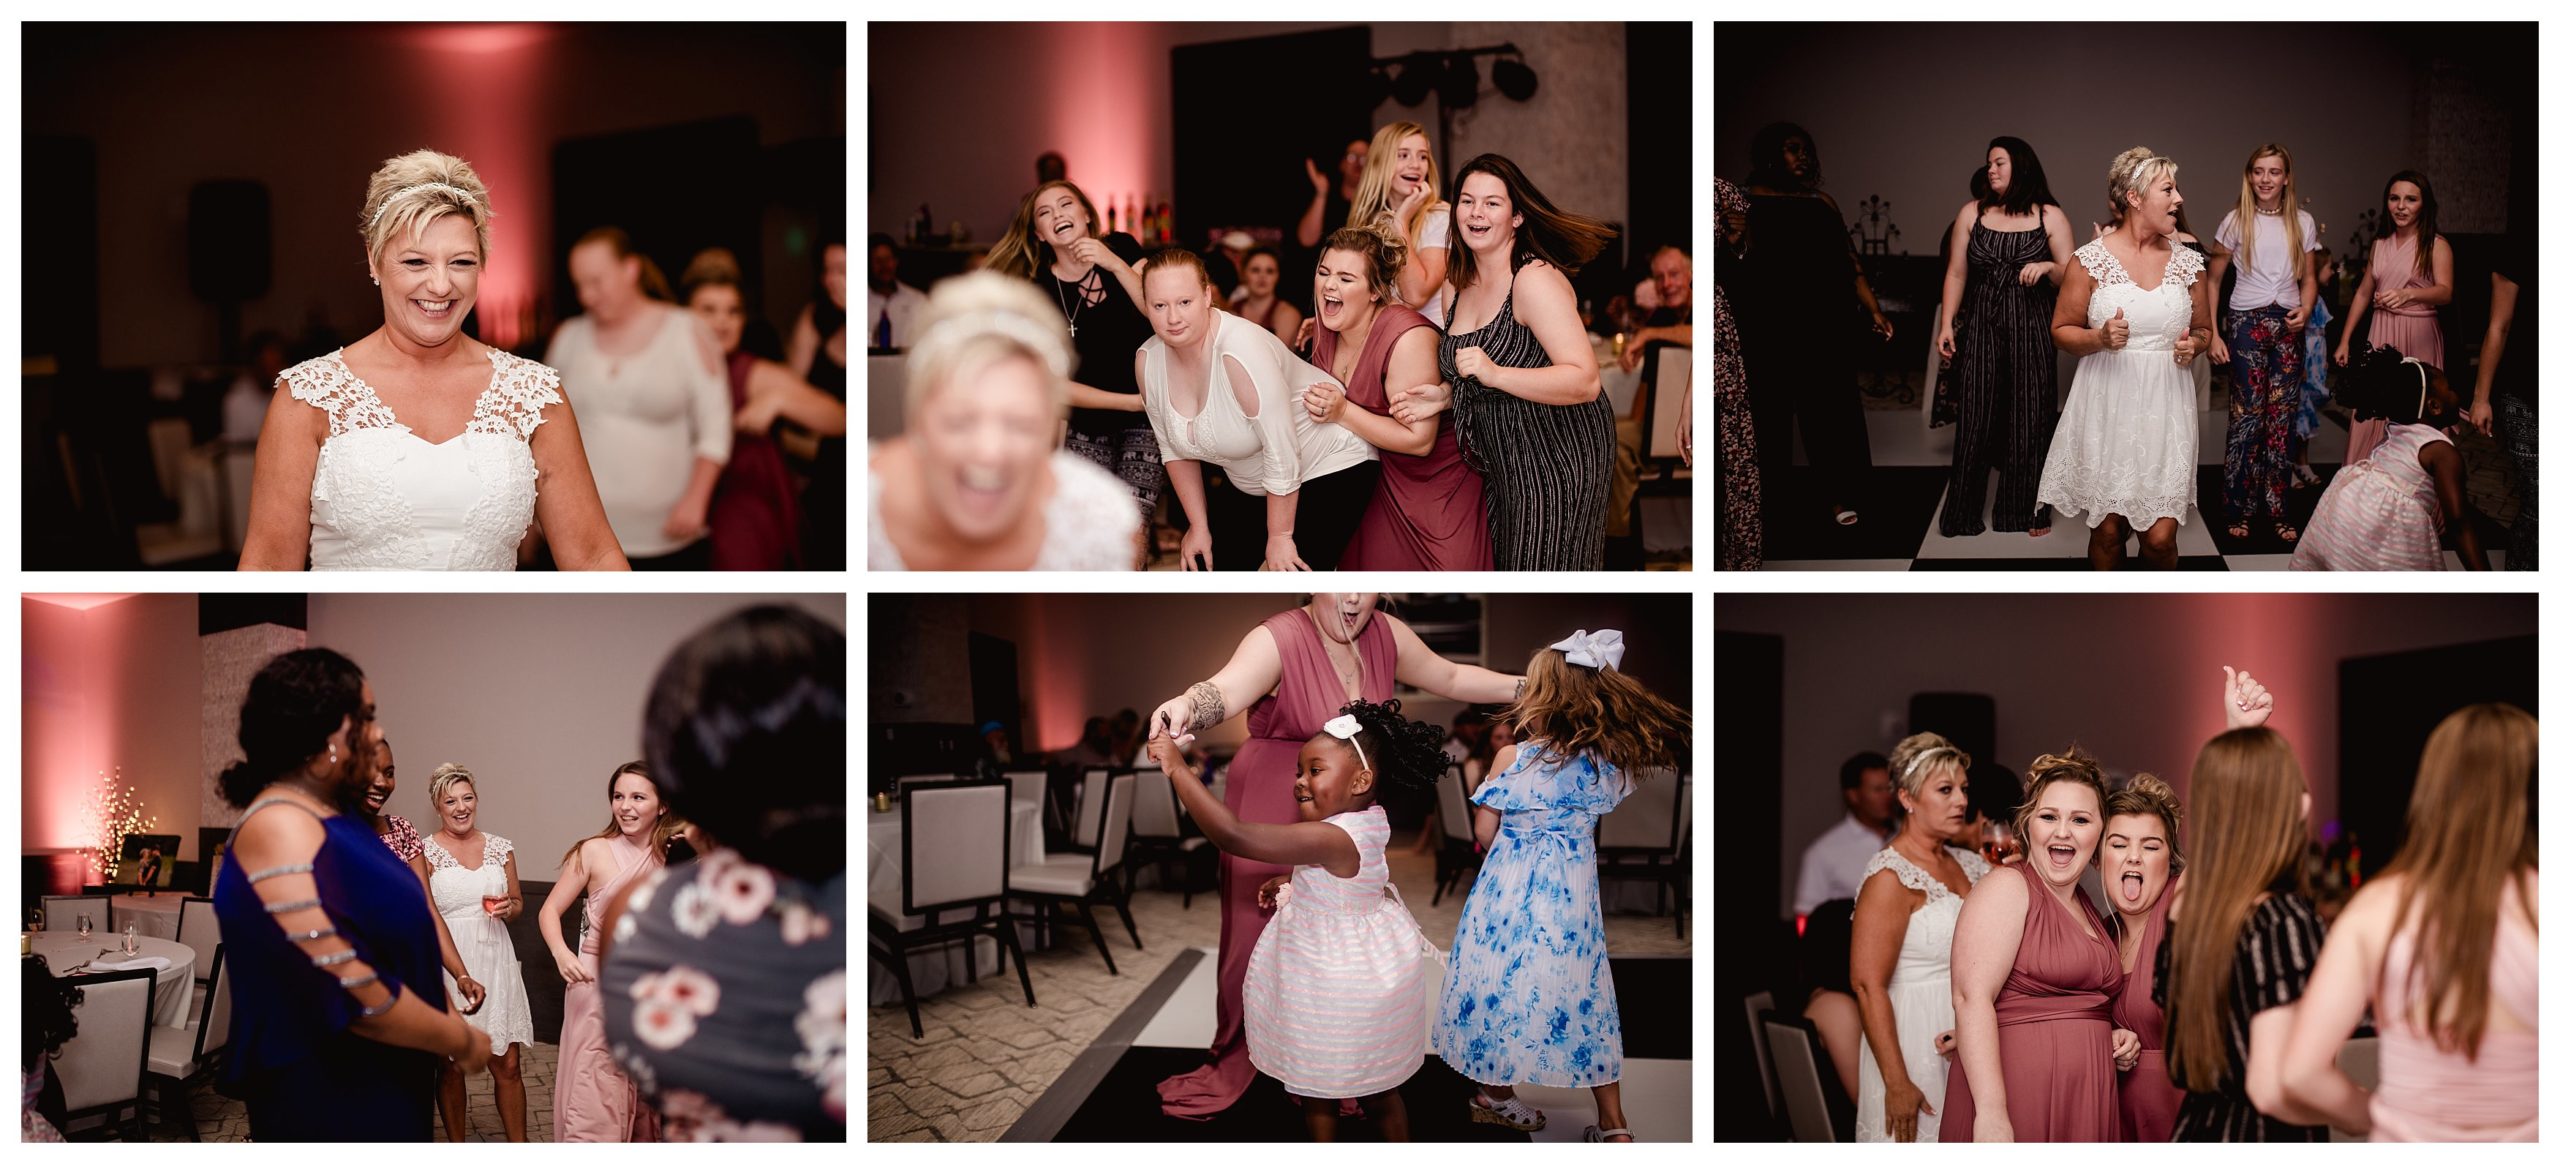 Fun reception photos during the bouquet toss and dancing.